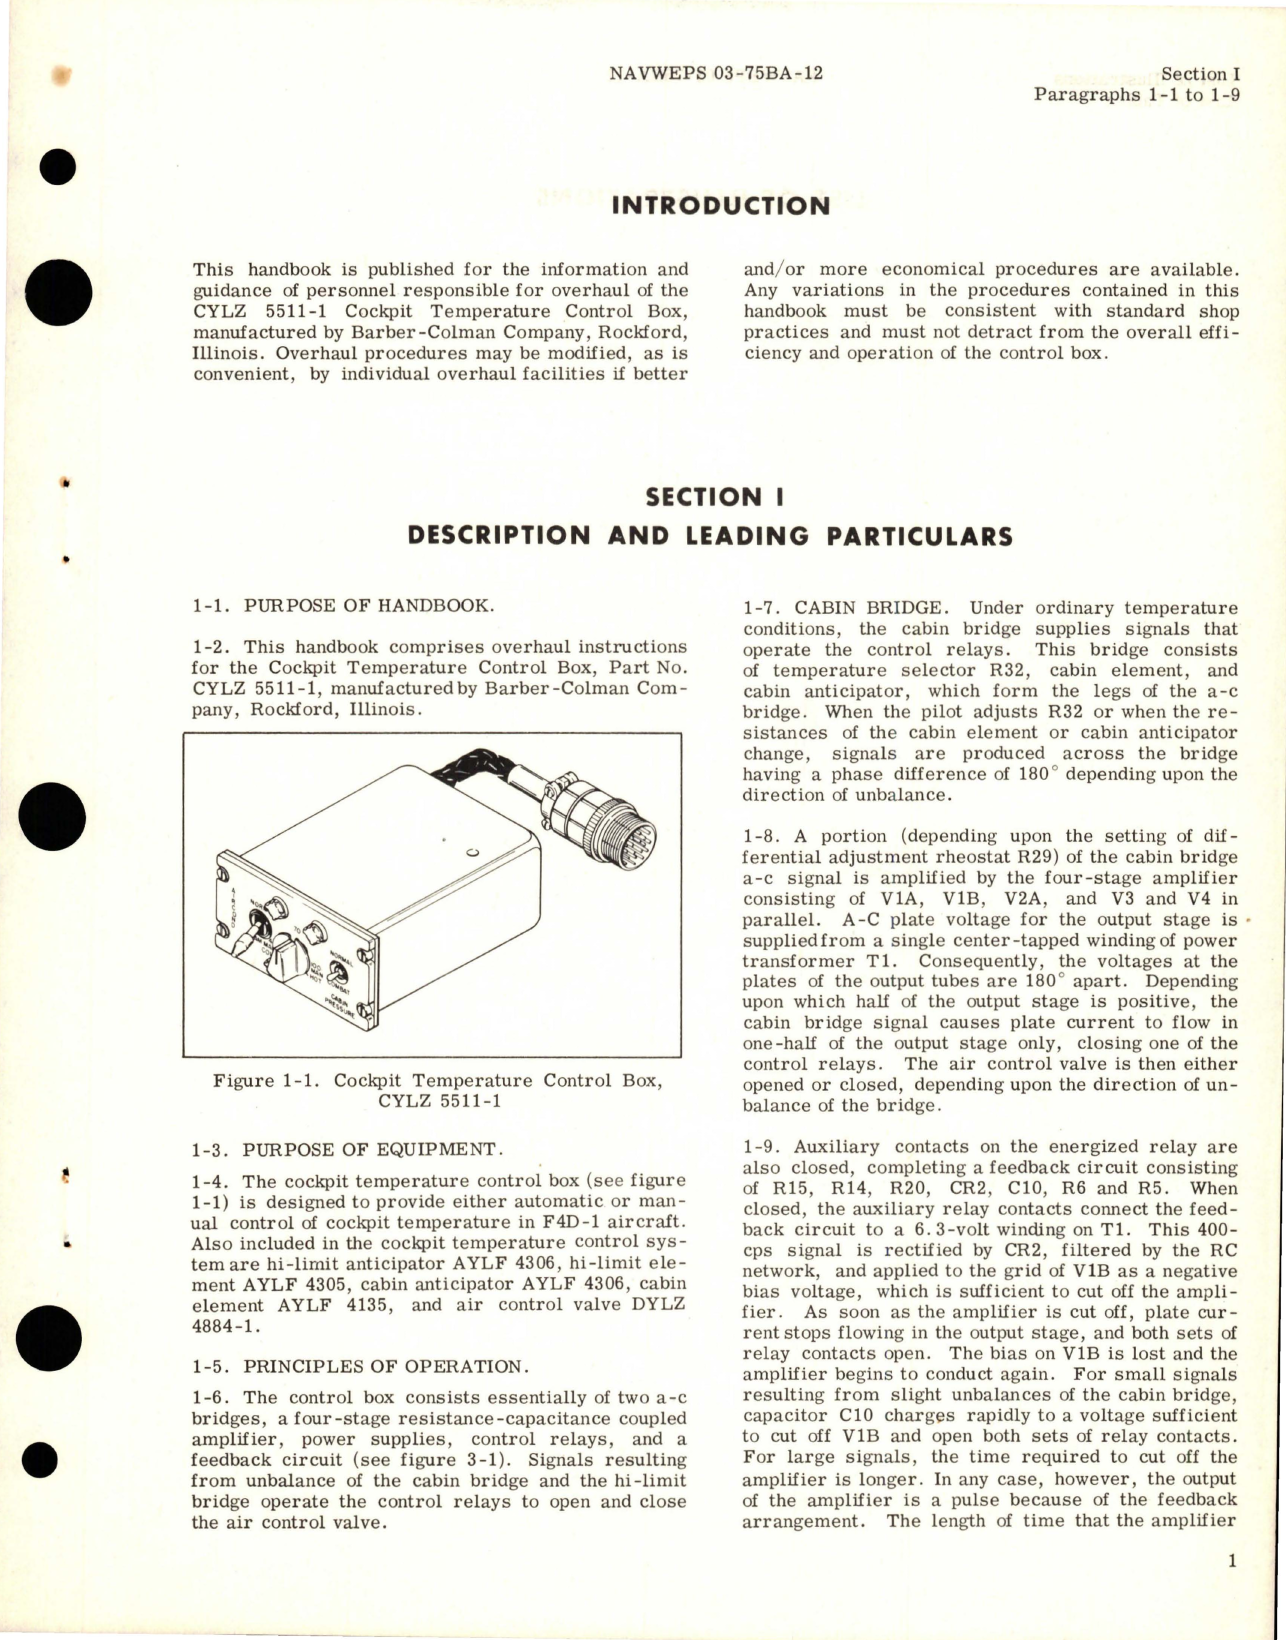 Sample page 5 from AirCorps Library document: Overhaul Instructions for Control Box Cockpit Temperature - Part CYLZ 5511-1 